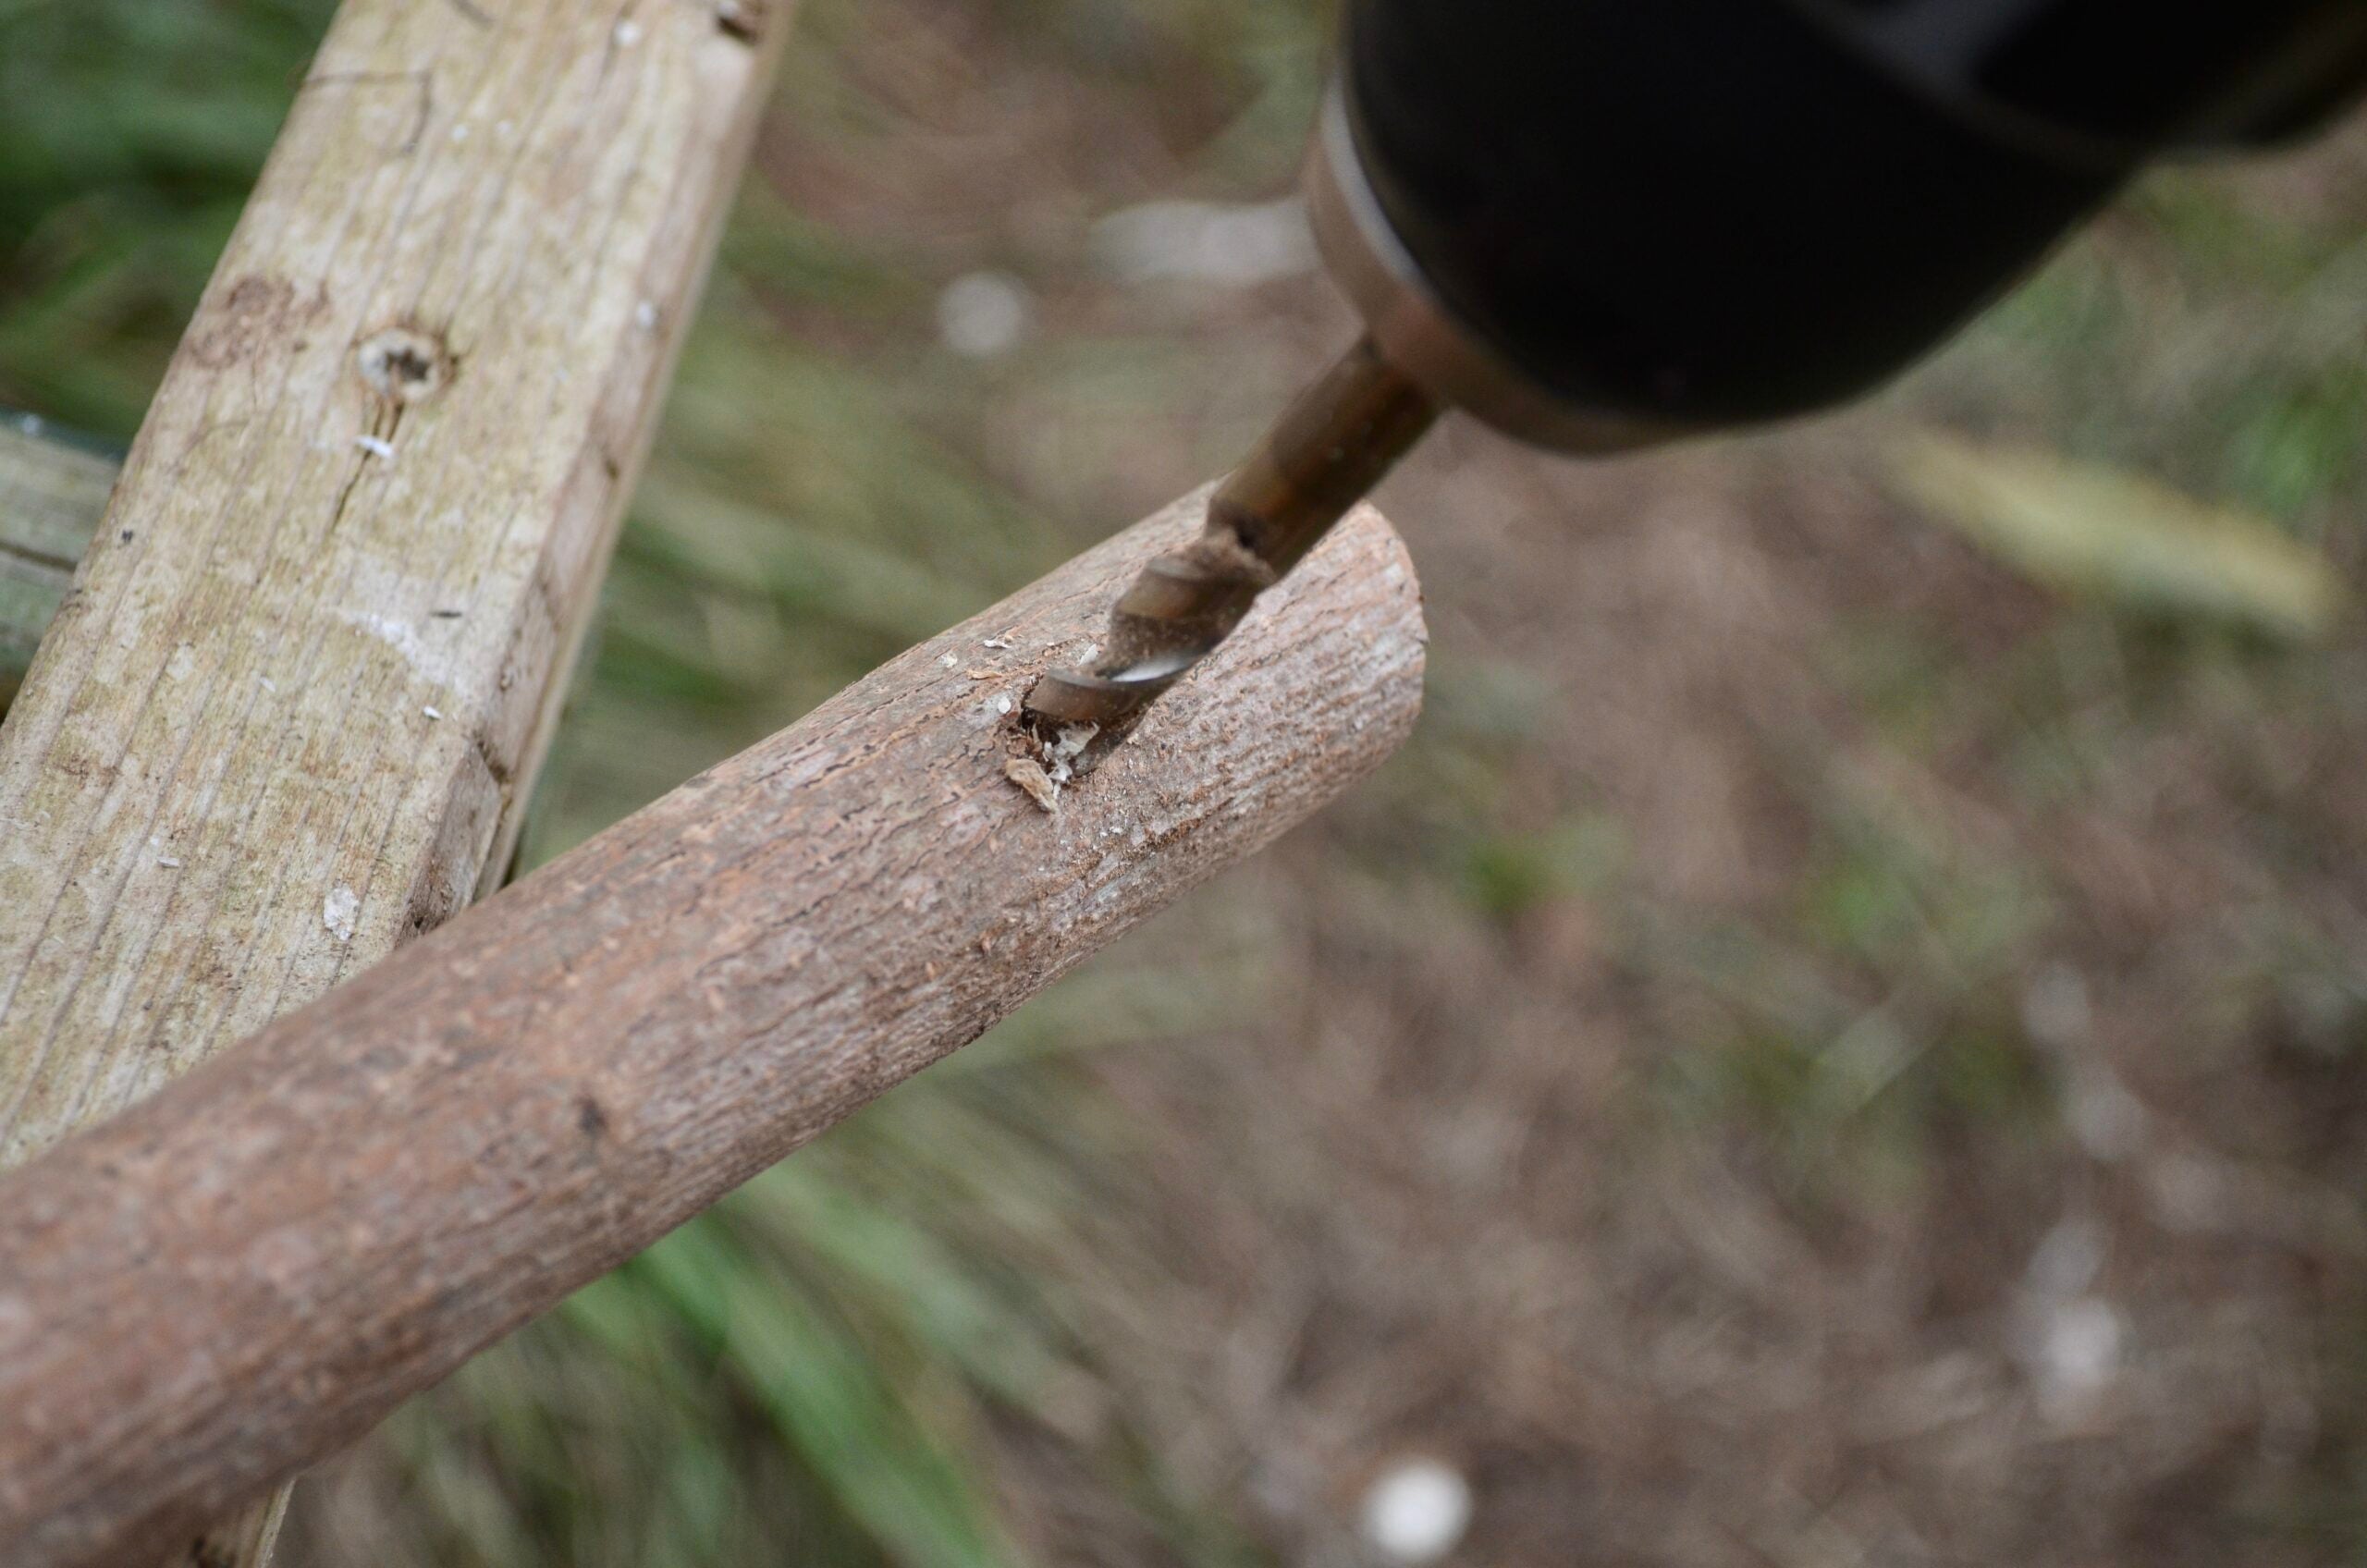 A close-up of a drill bit in the chuck of a drill, going into a stick for the seat of the chicken swing.